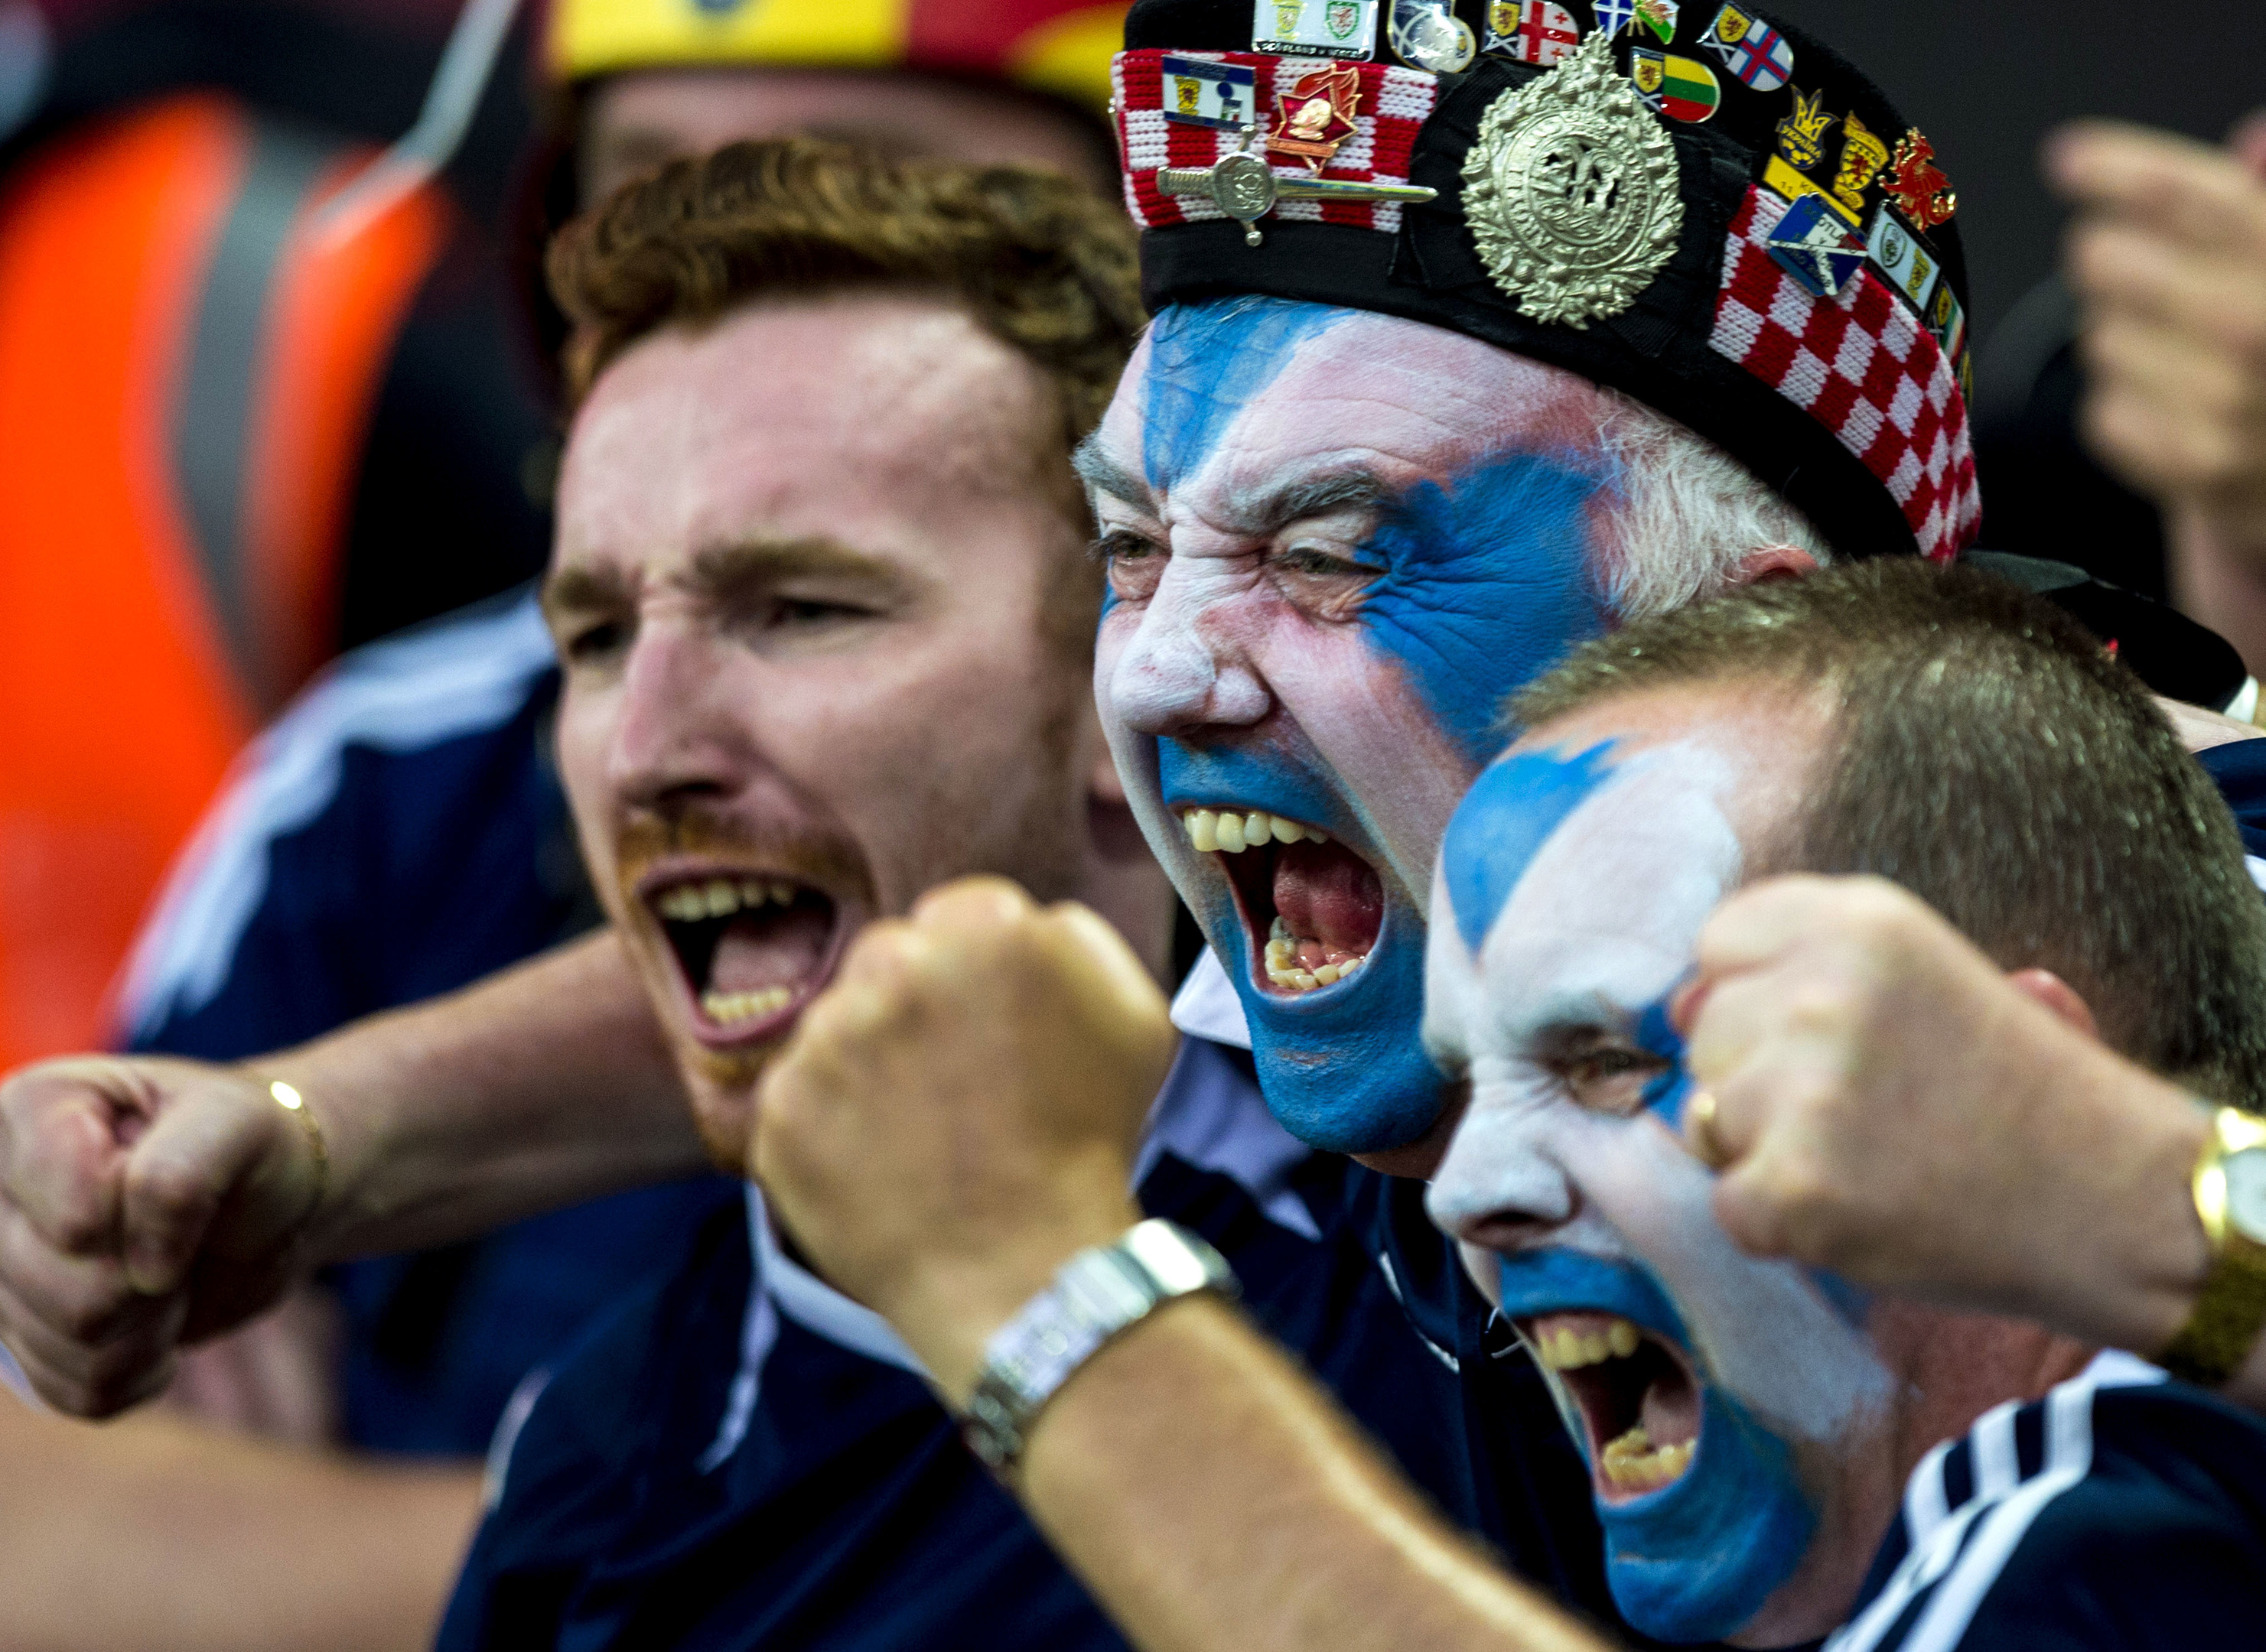 Will Scotland fans be celebrating at Wembley?